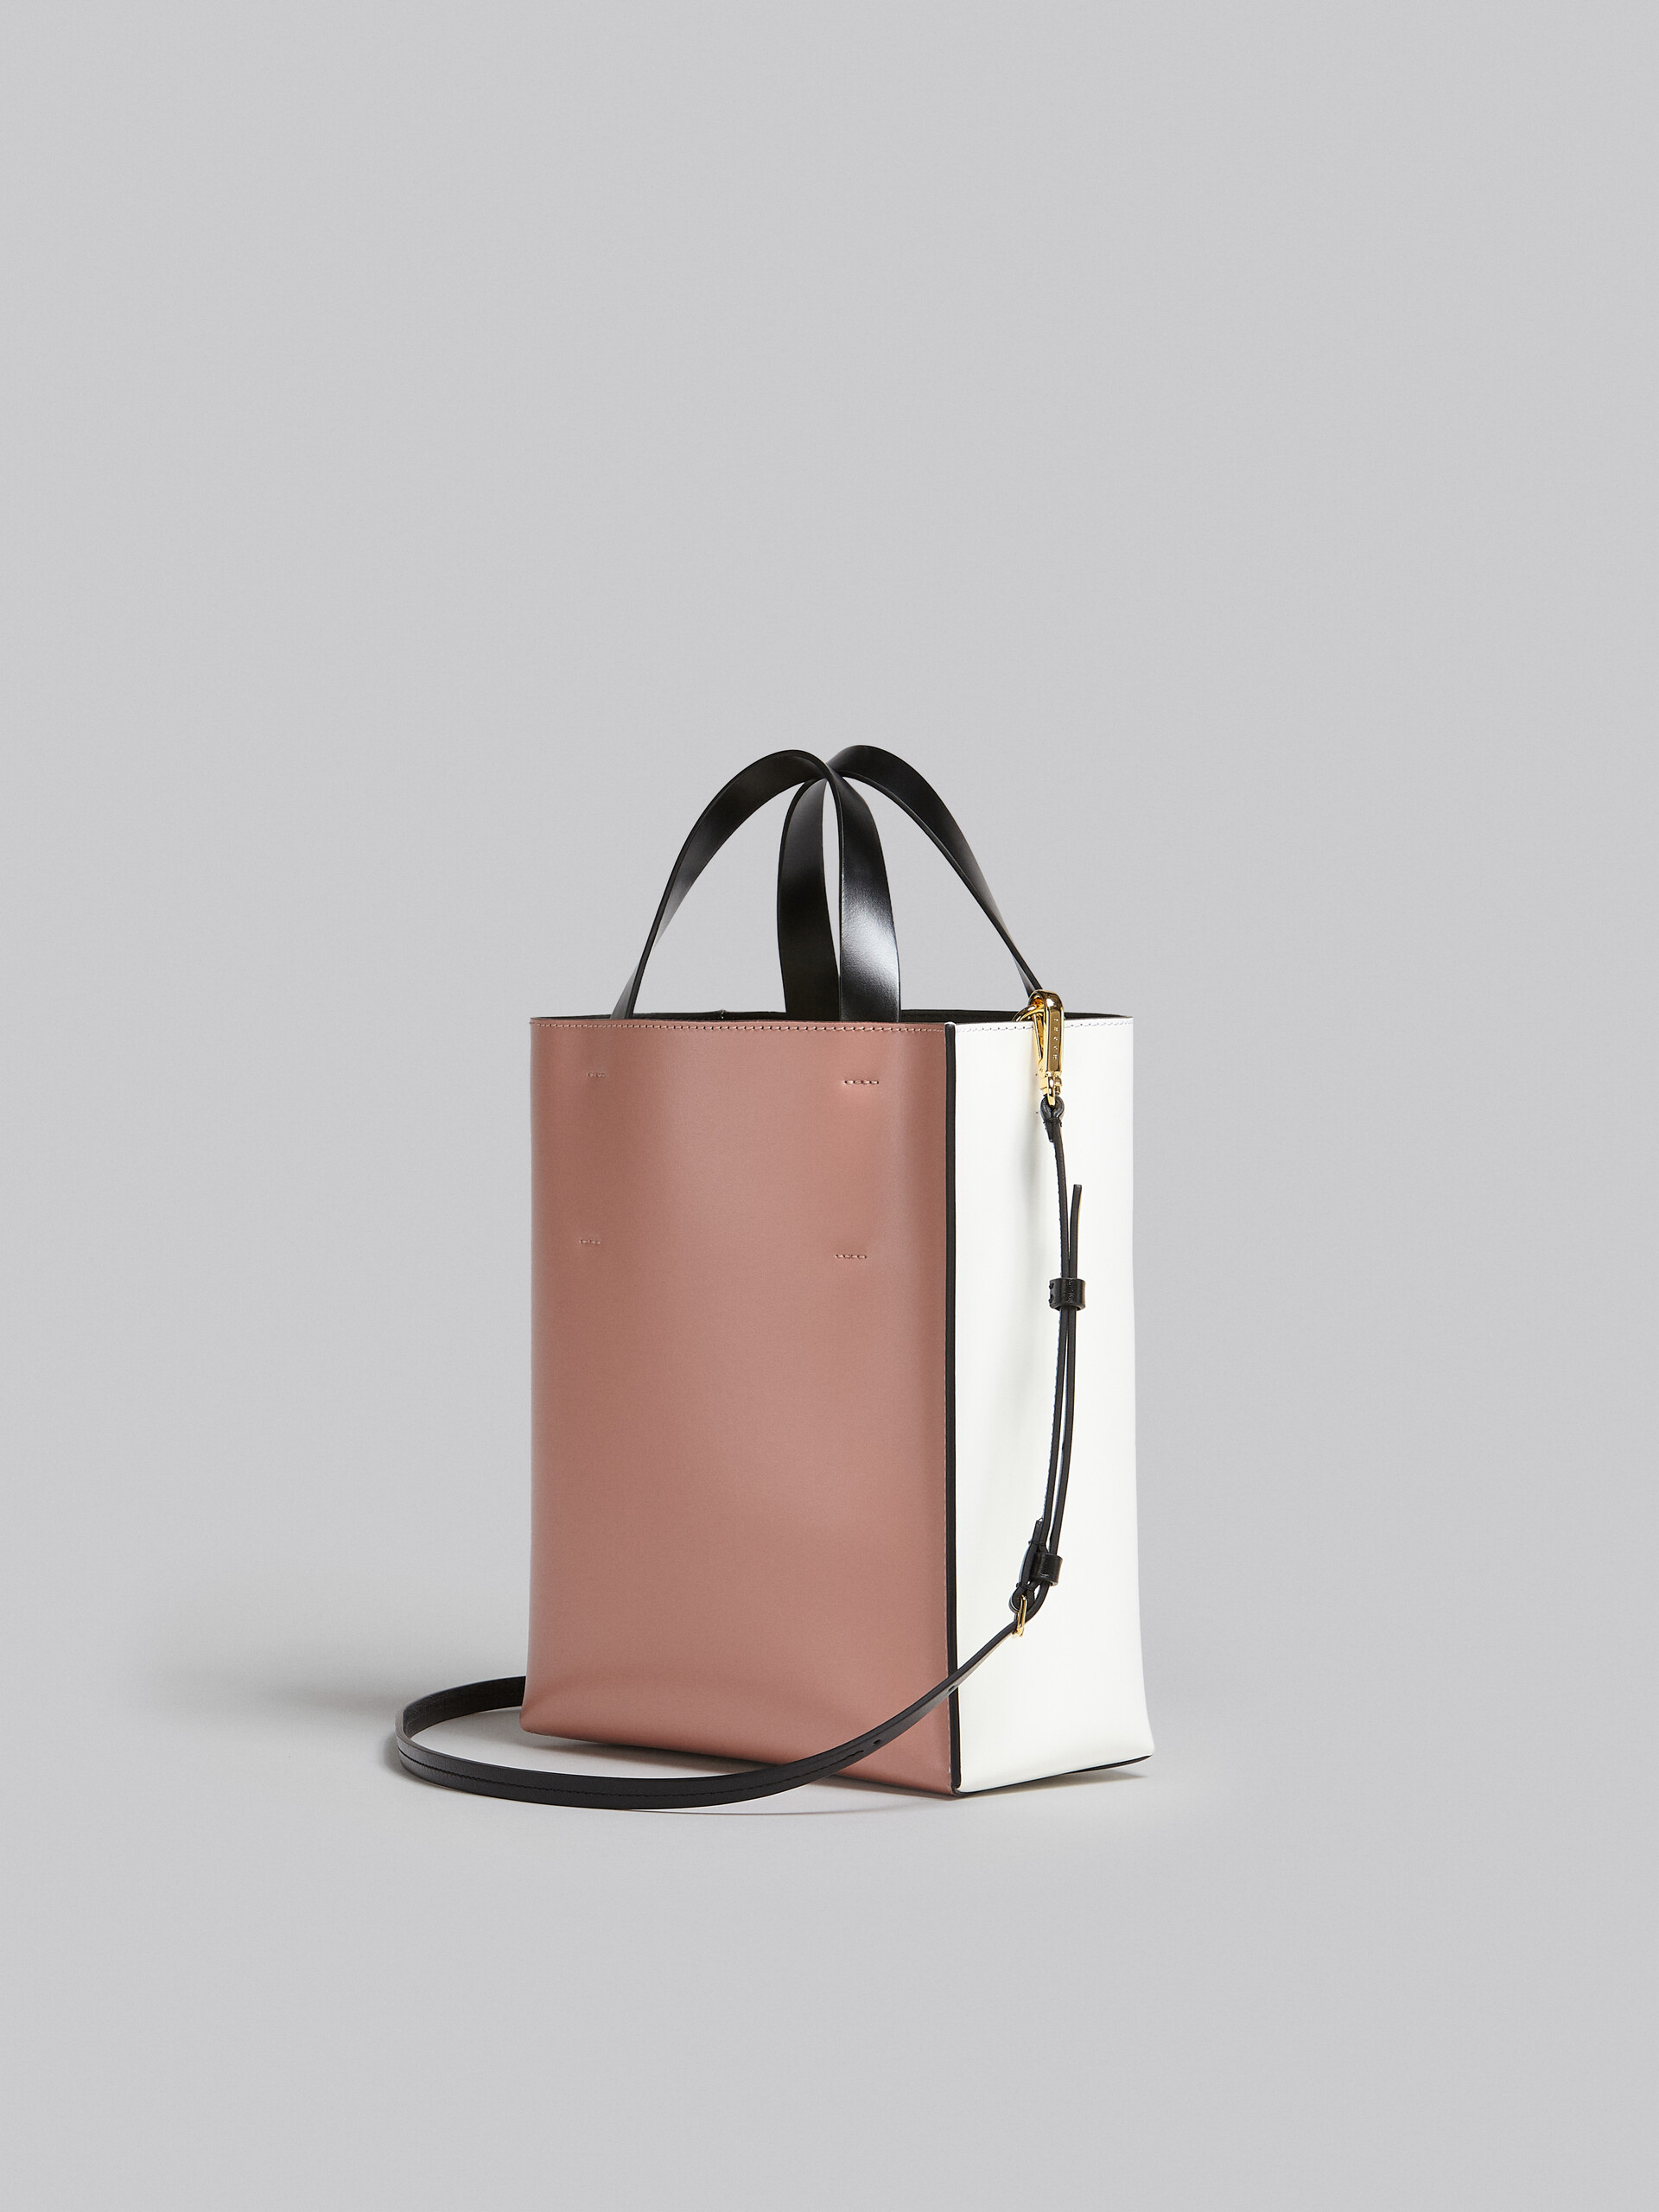 Museo Soft Small Bag in white and pink leather - Shopping Bags - Image 3